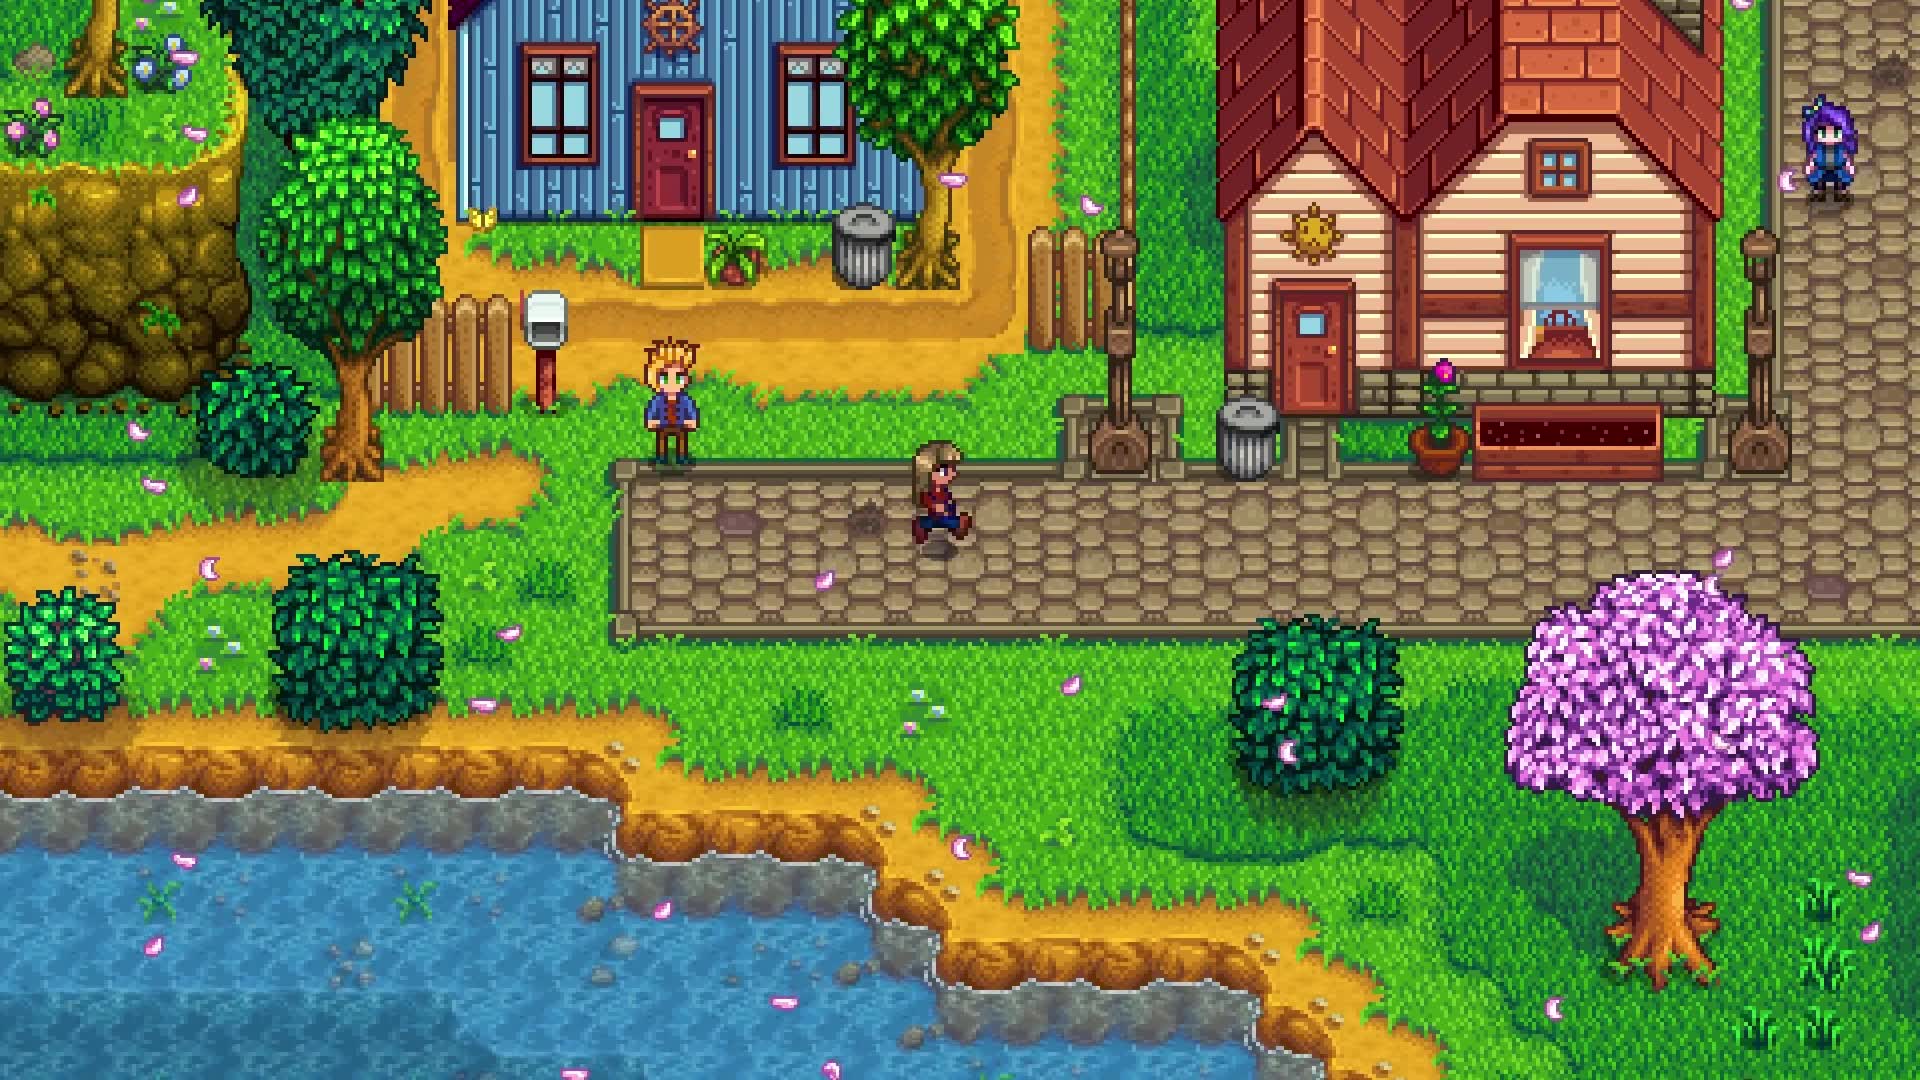 How To Fix Stardew Valley Not Connecting to Online Services